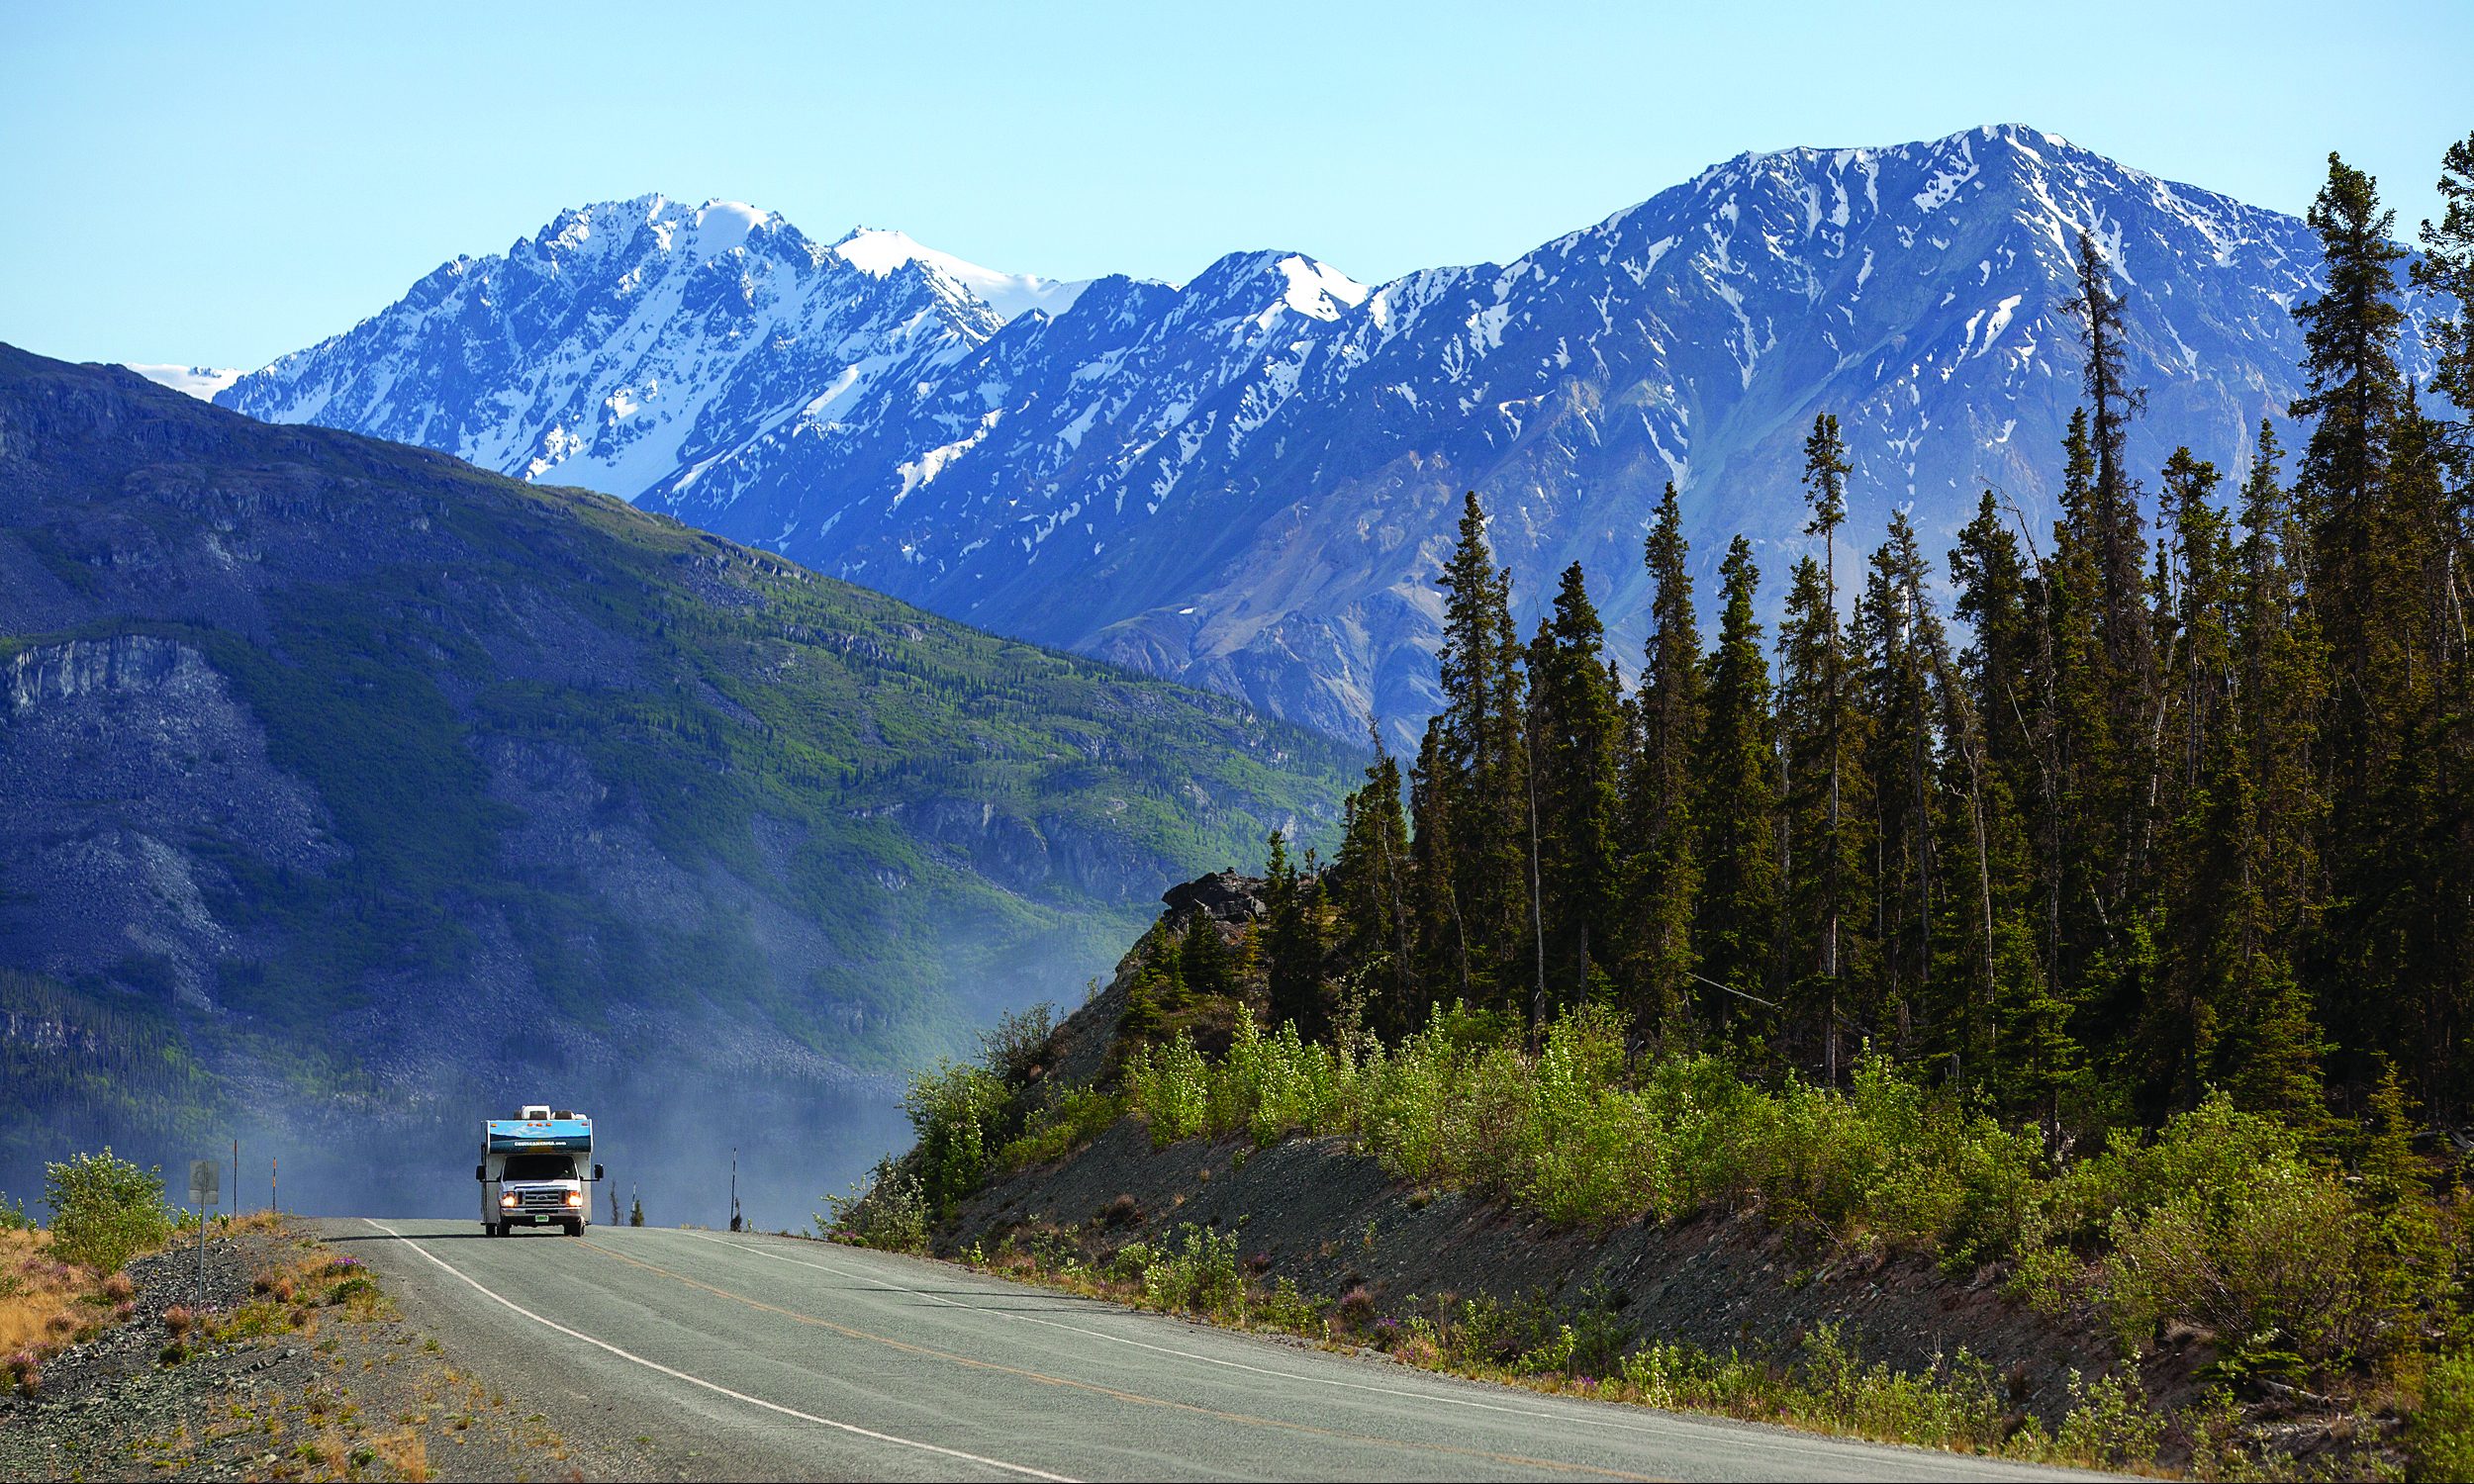 Sunny day on the Alaskan Highway - 2023 Photo Contest sponsored by ...